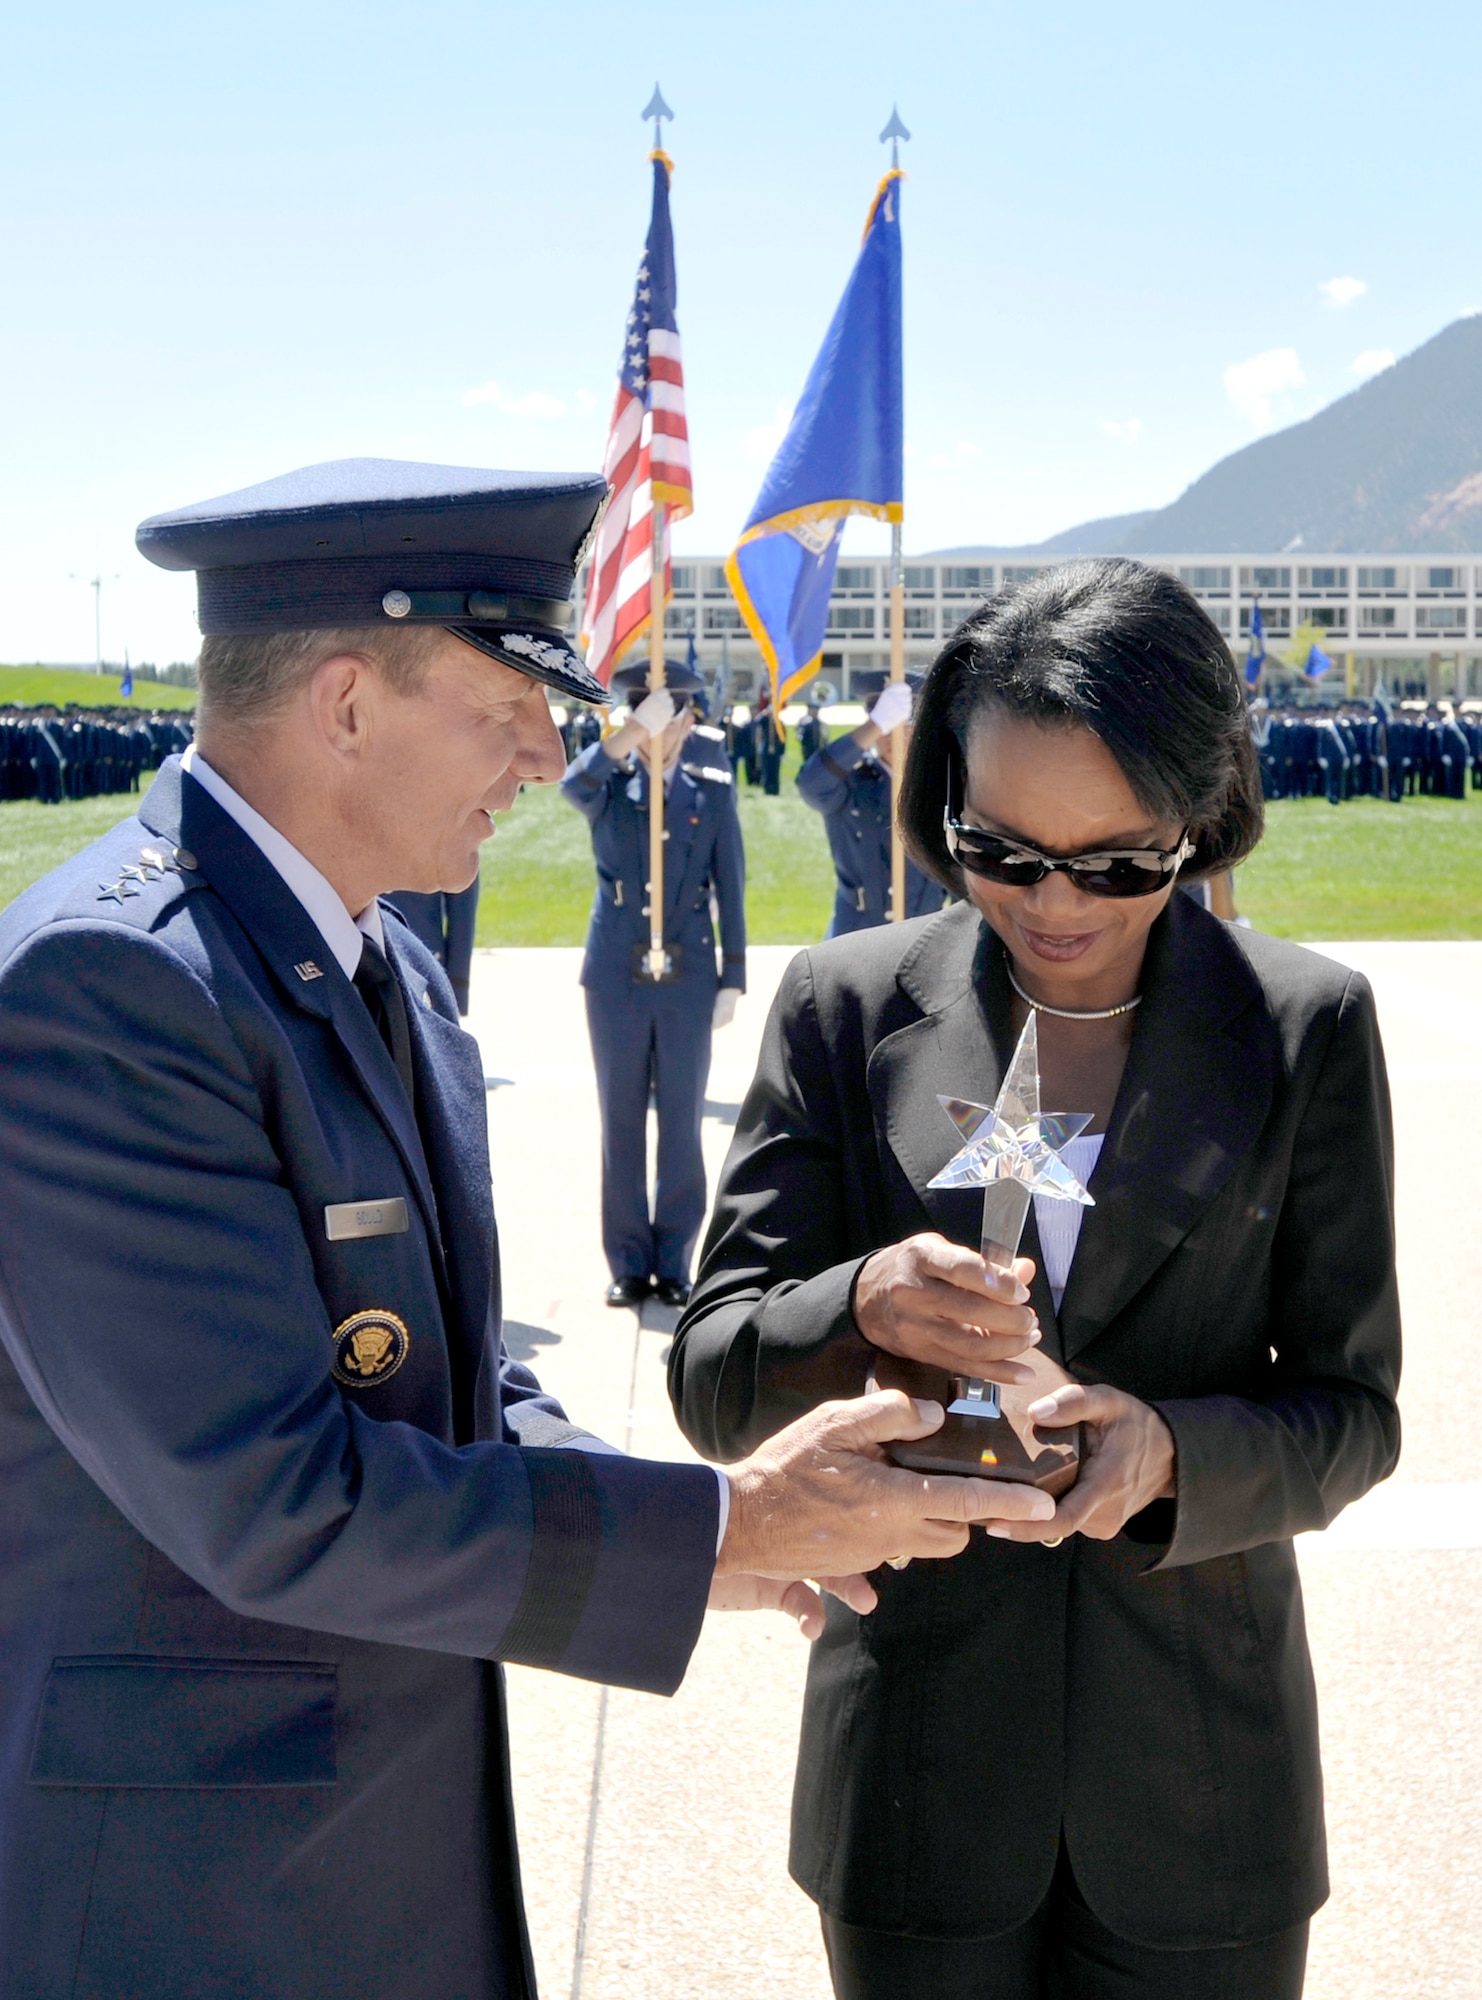 Air Force Academy Superintendent Lt. Gen. Michael C. Gould presents Dr. Condoleezza Rice with the 2009 Thomas D. White Award there Aug. 26, 2010, for her contributions to national security and defense during her career as a professor, presidential adviser, diplomat, author and national security expert. (U.S. Air Force photo/Bill Evans)